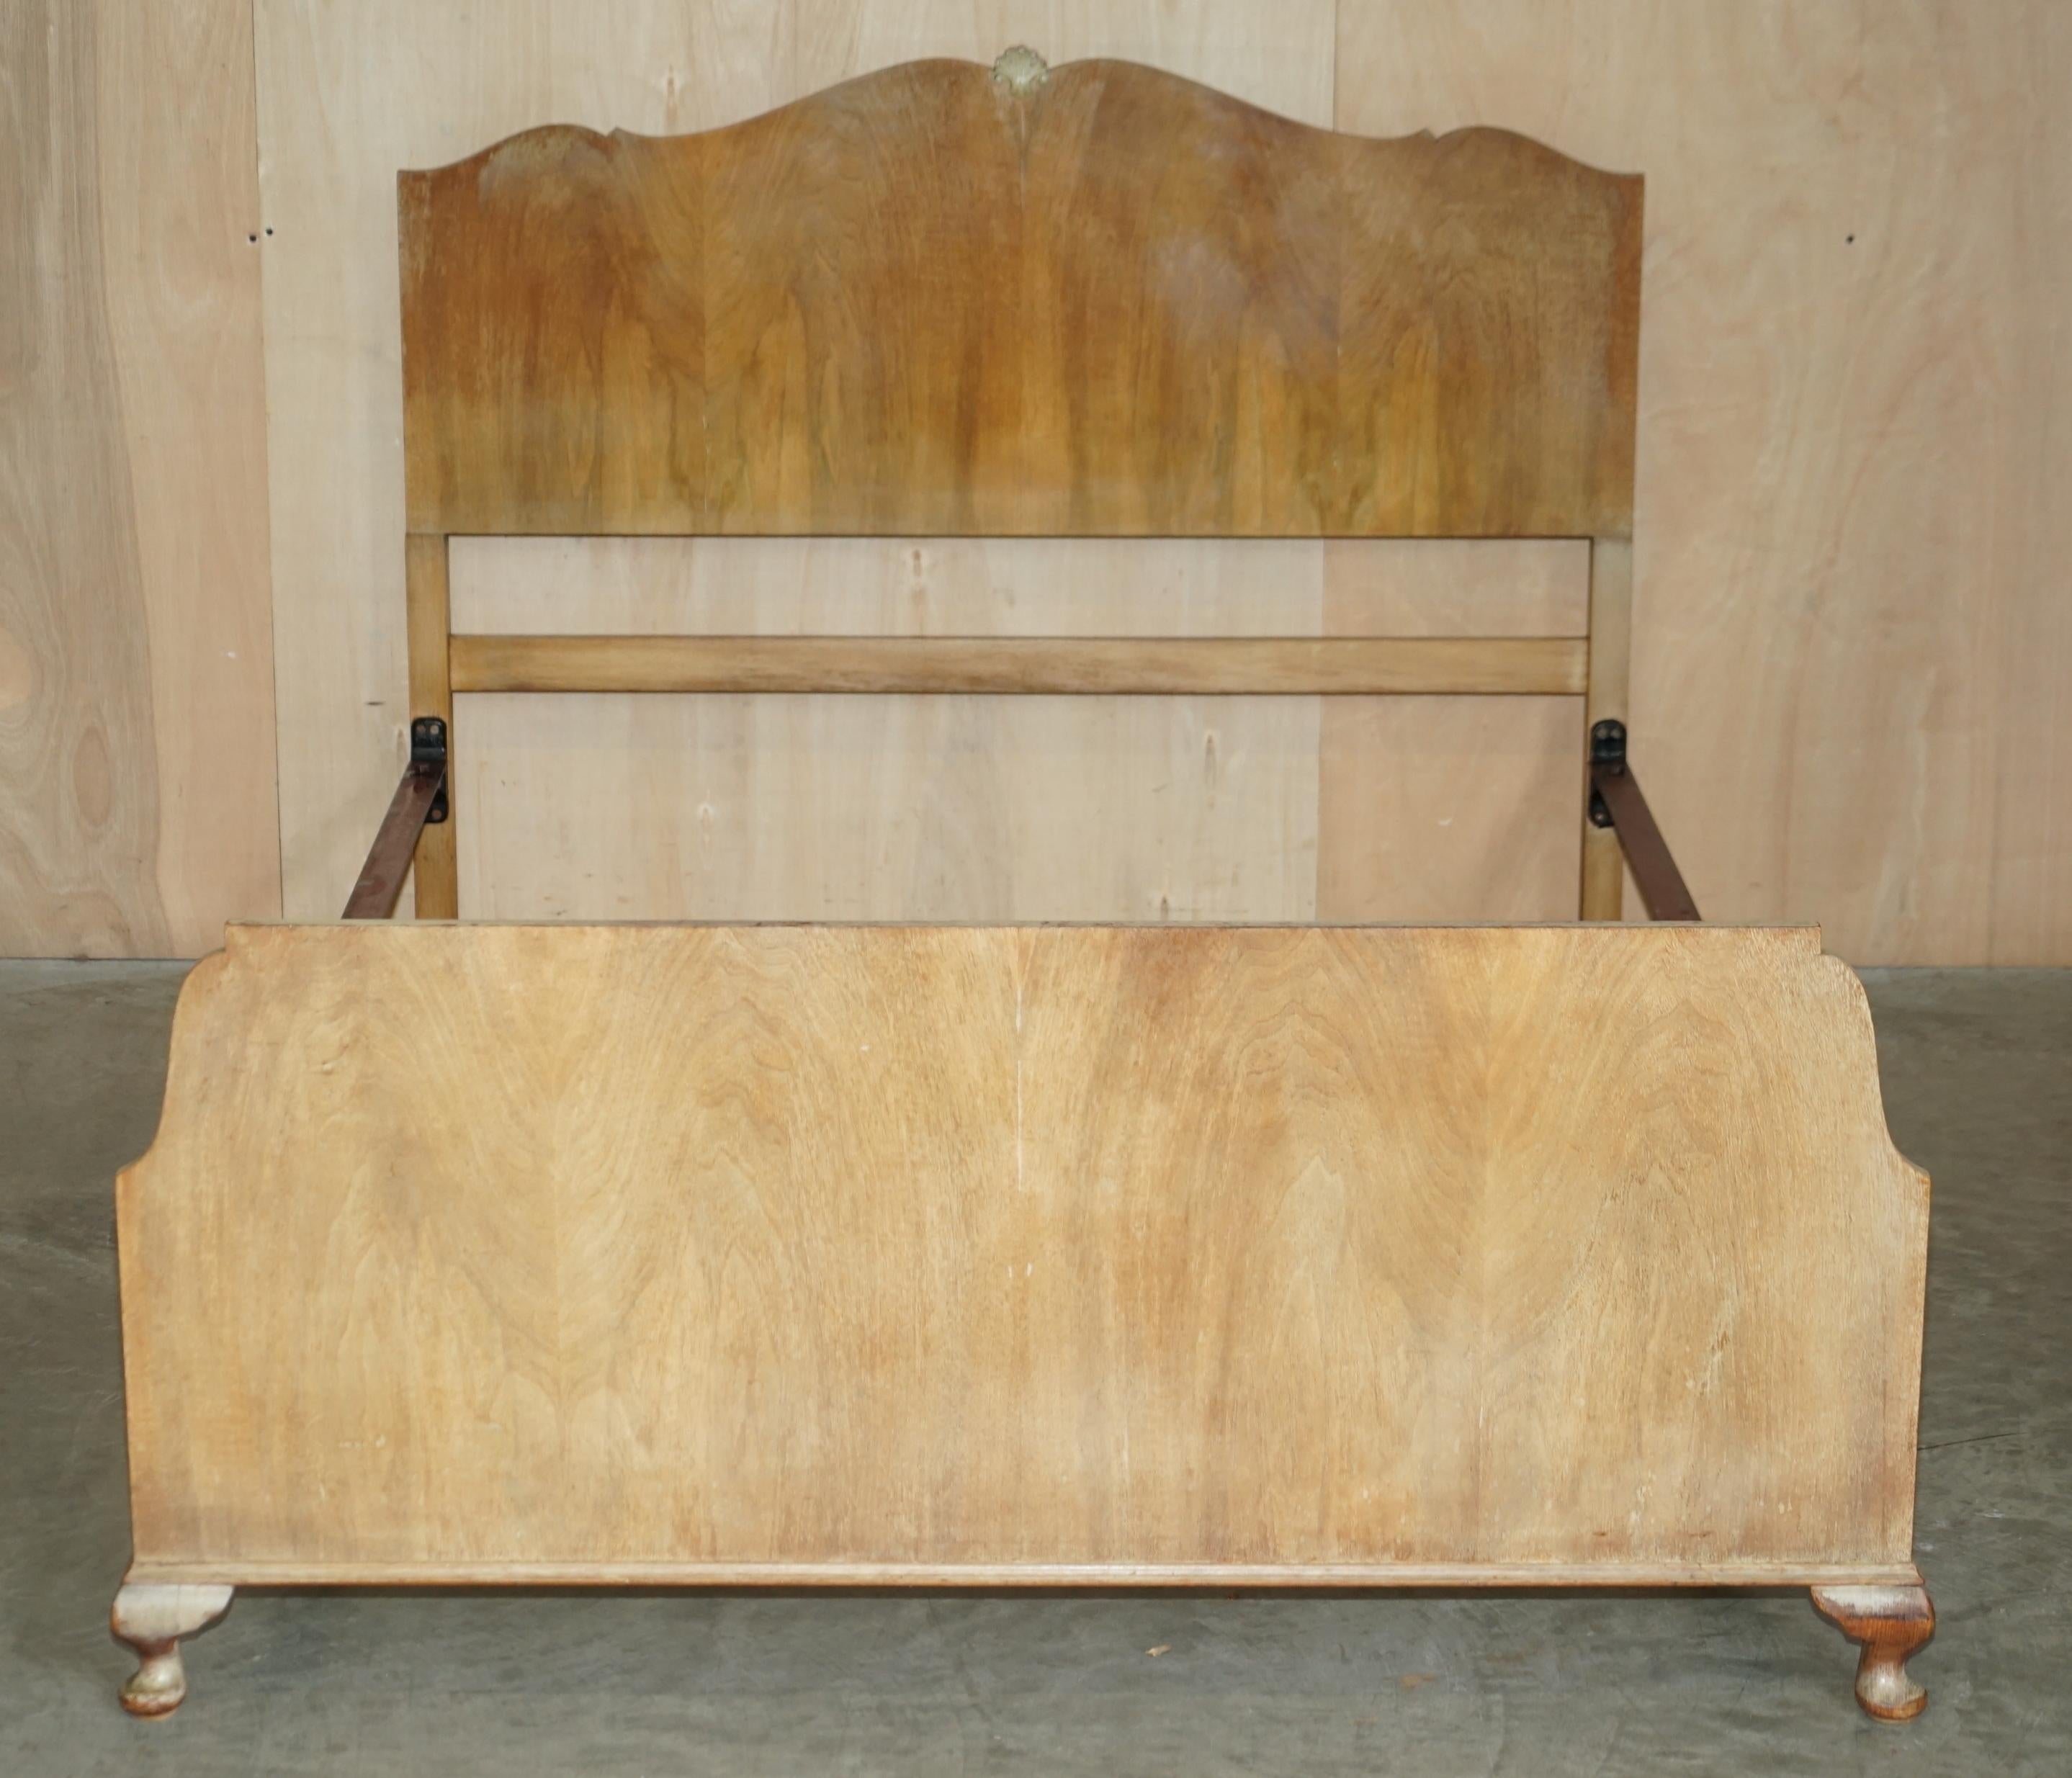 We are delighted to offer for sale this stunning Circa 1900 bleached Walnut bedstead frame with Vono rails

A lovely original hand made in England burr Walnut bed frame. The timber grain and colour is sublime, it looks rich and warm in any